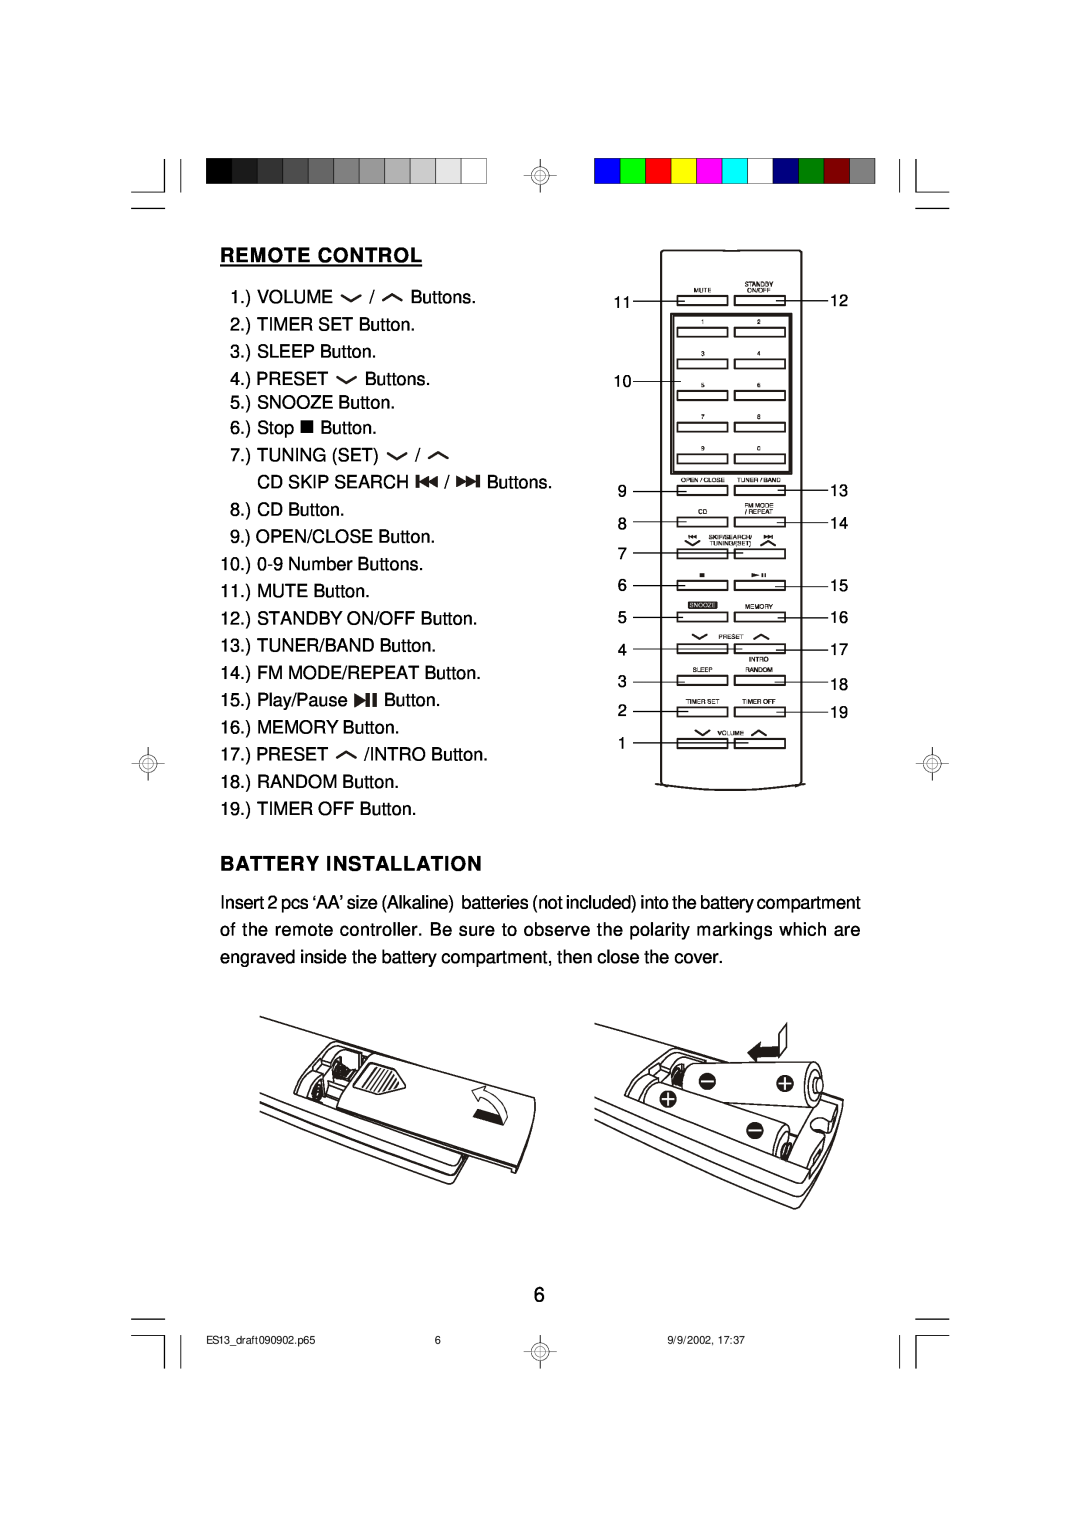 Emerson ES13 owner manual Remote Control, Battery Installation 